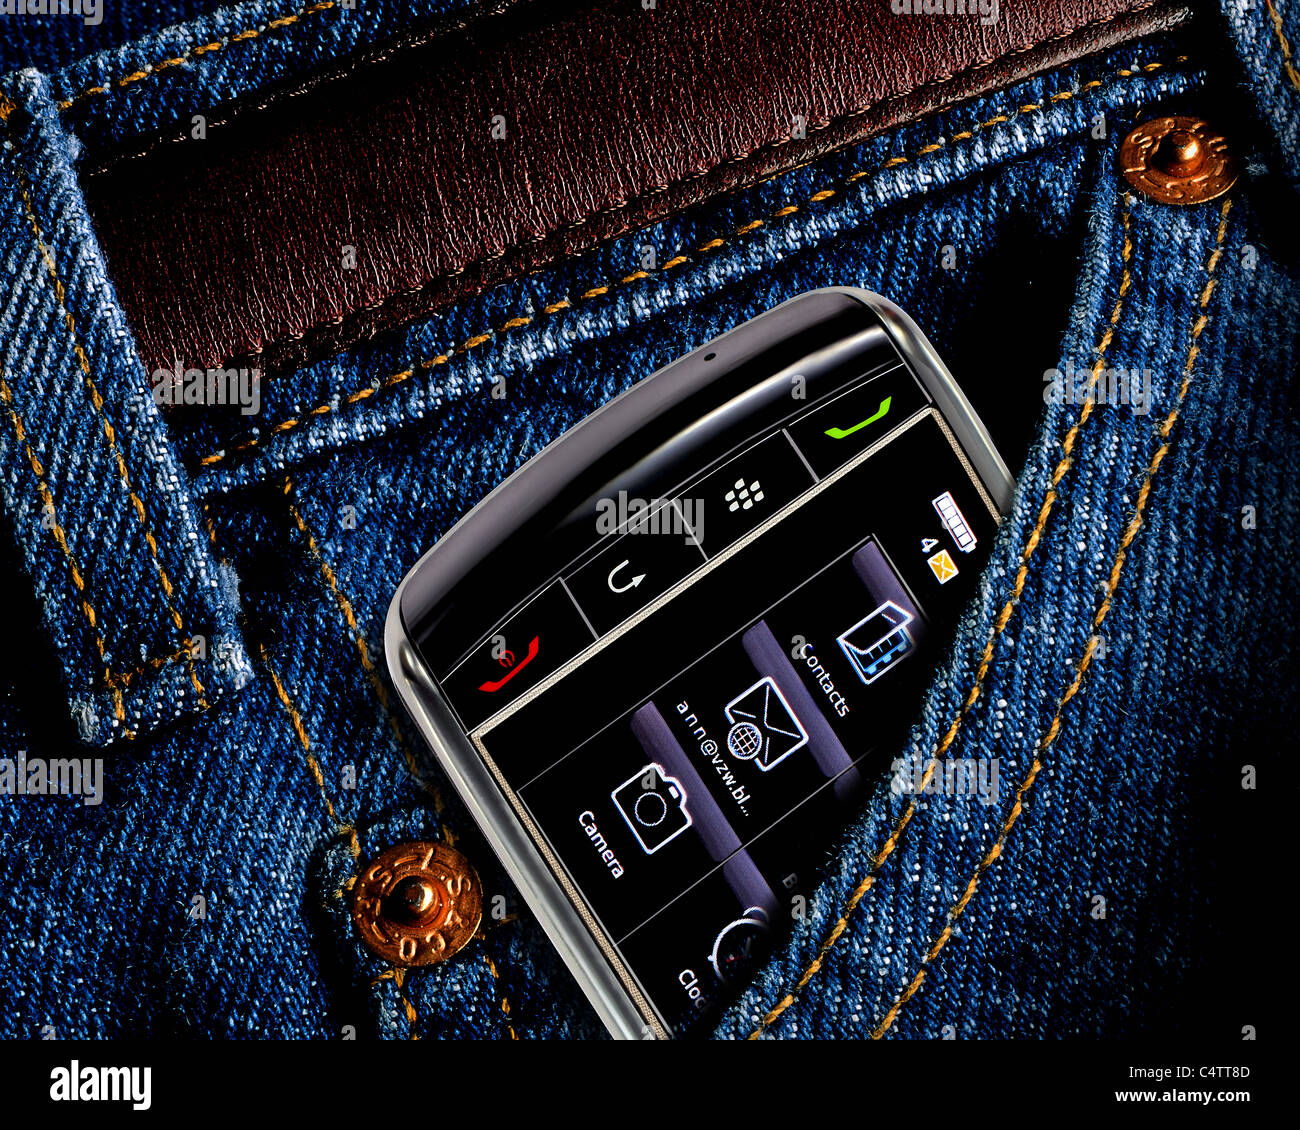 CLOSEUP OF CELL PHONE DEVICE PARTLY TUCKED INTO BLUE JEANS POCKET Stock Photo